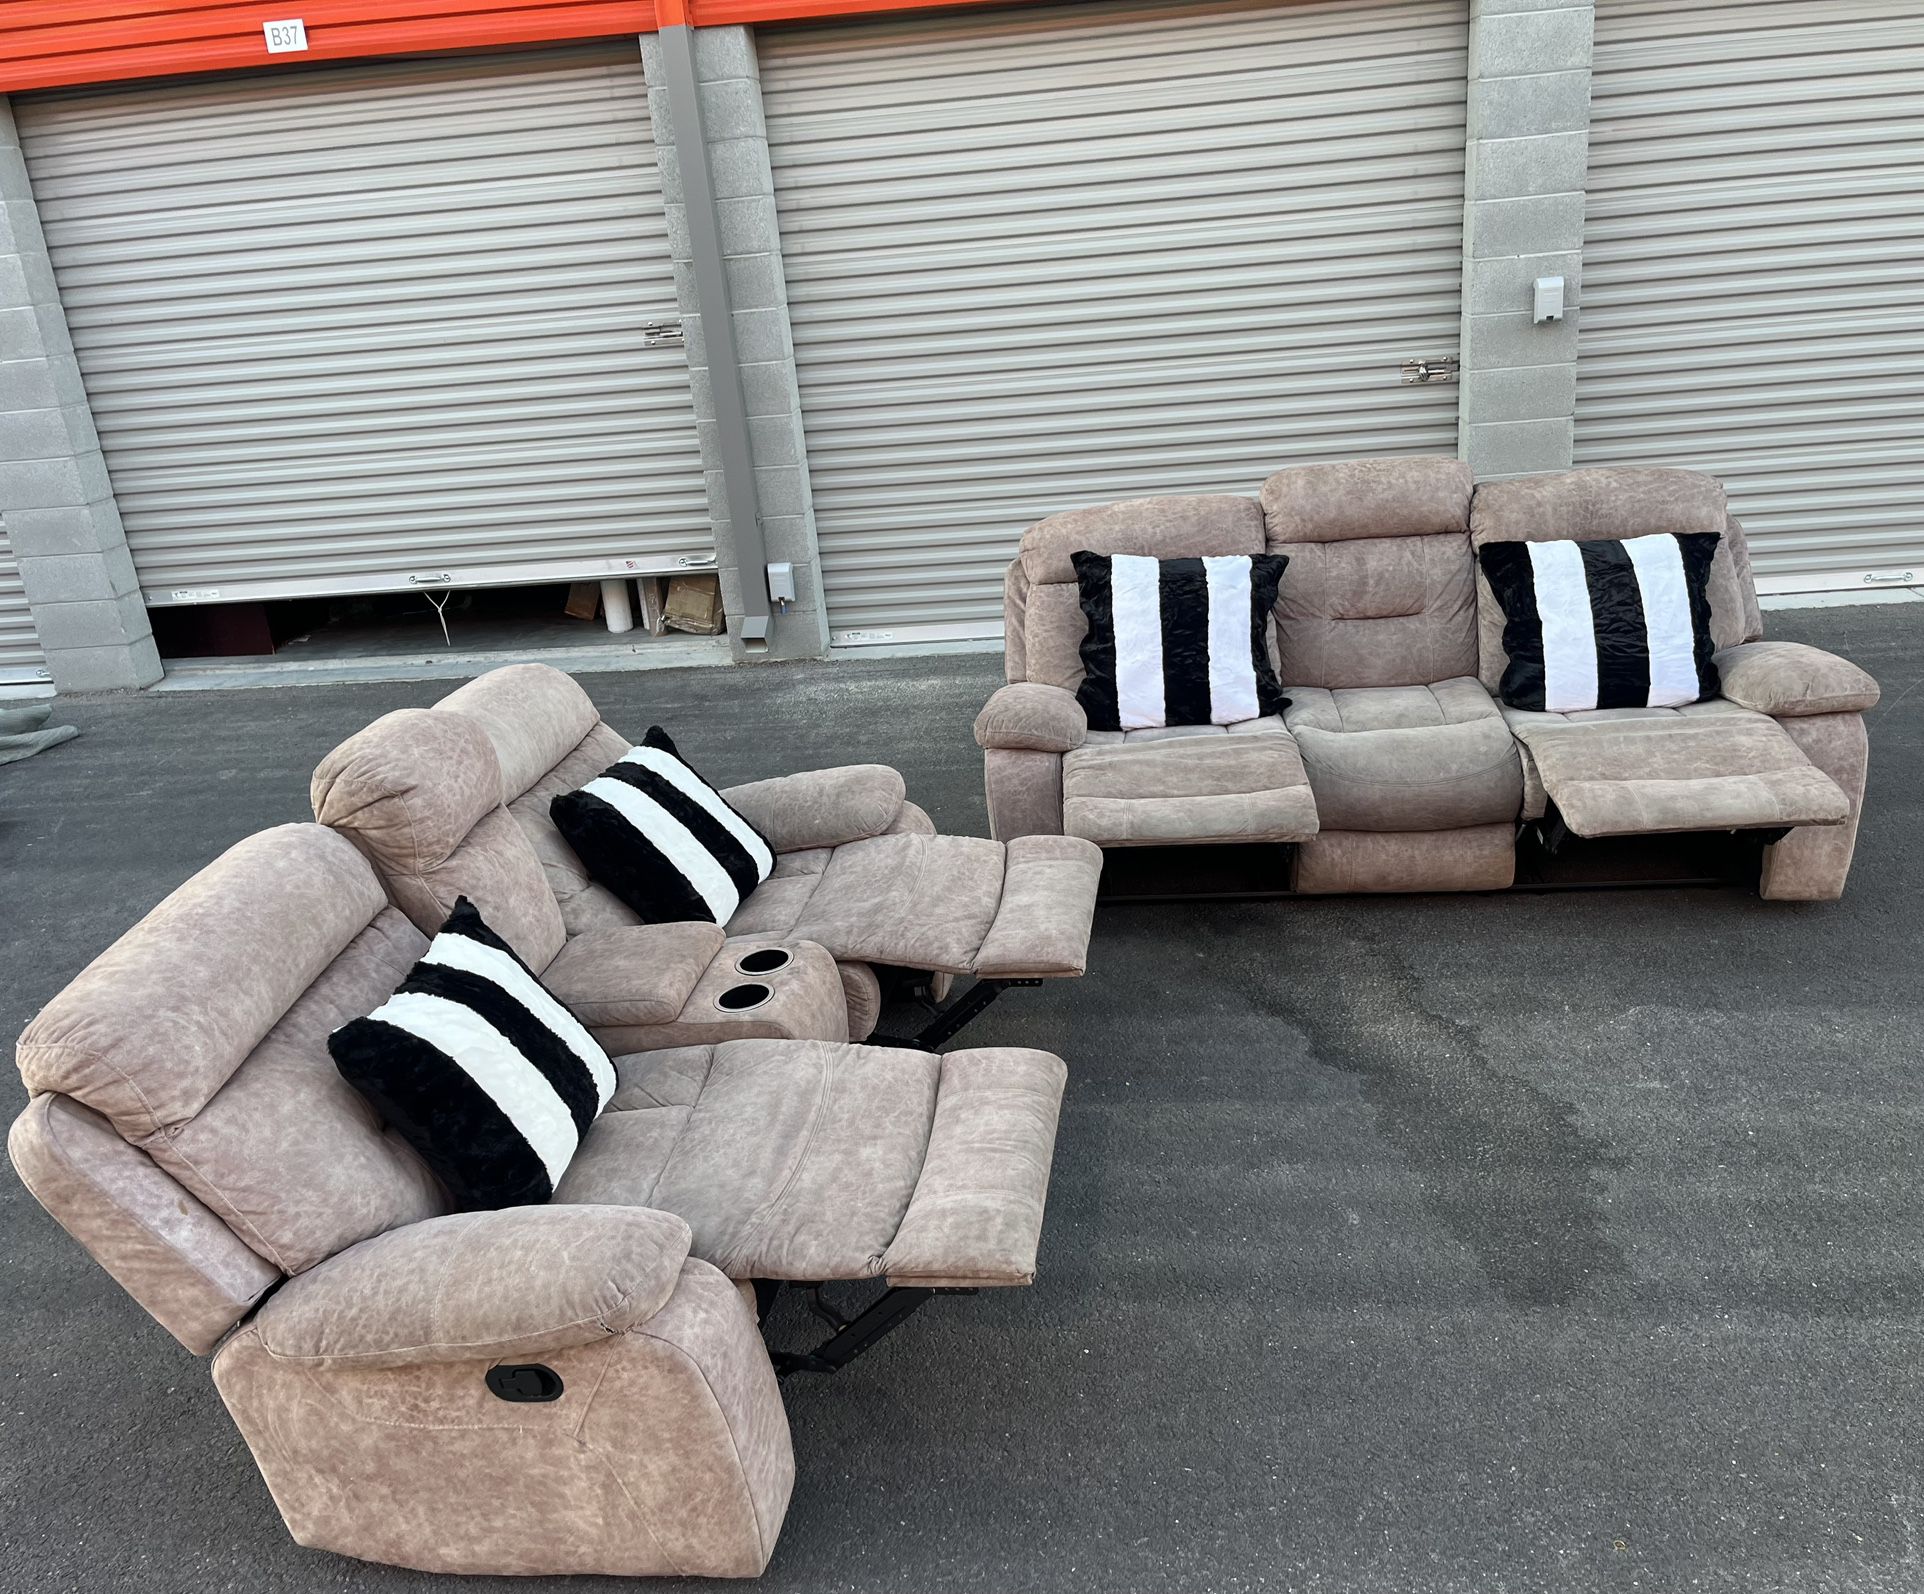 😍NICE & AFFORDABLE RECLINER SOFA SET ⭐️DELIVERY AVAILABLE 🚚